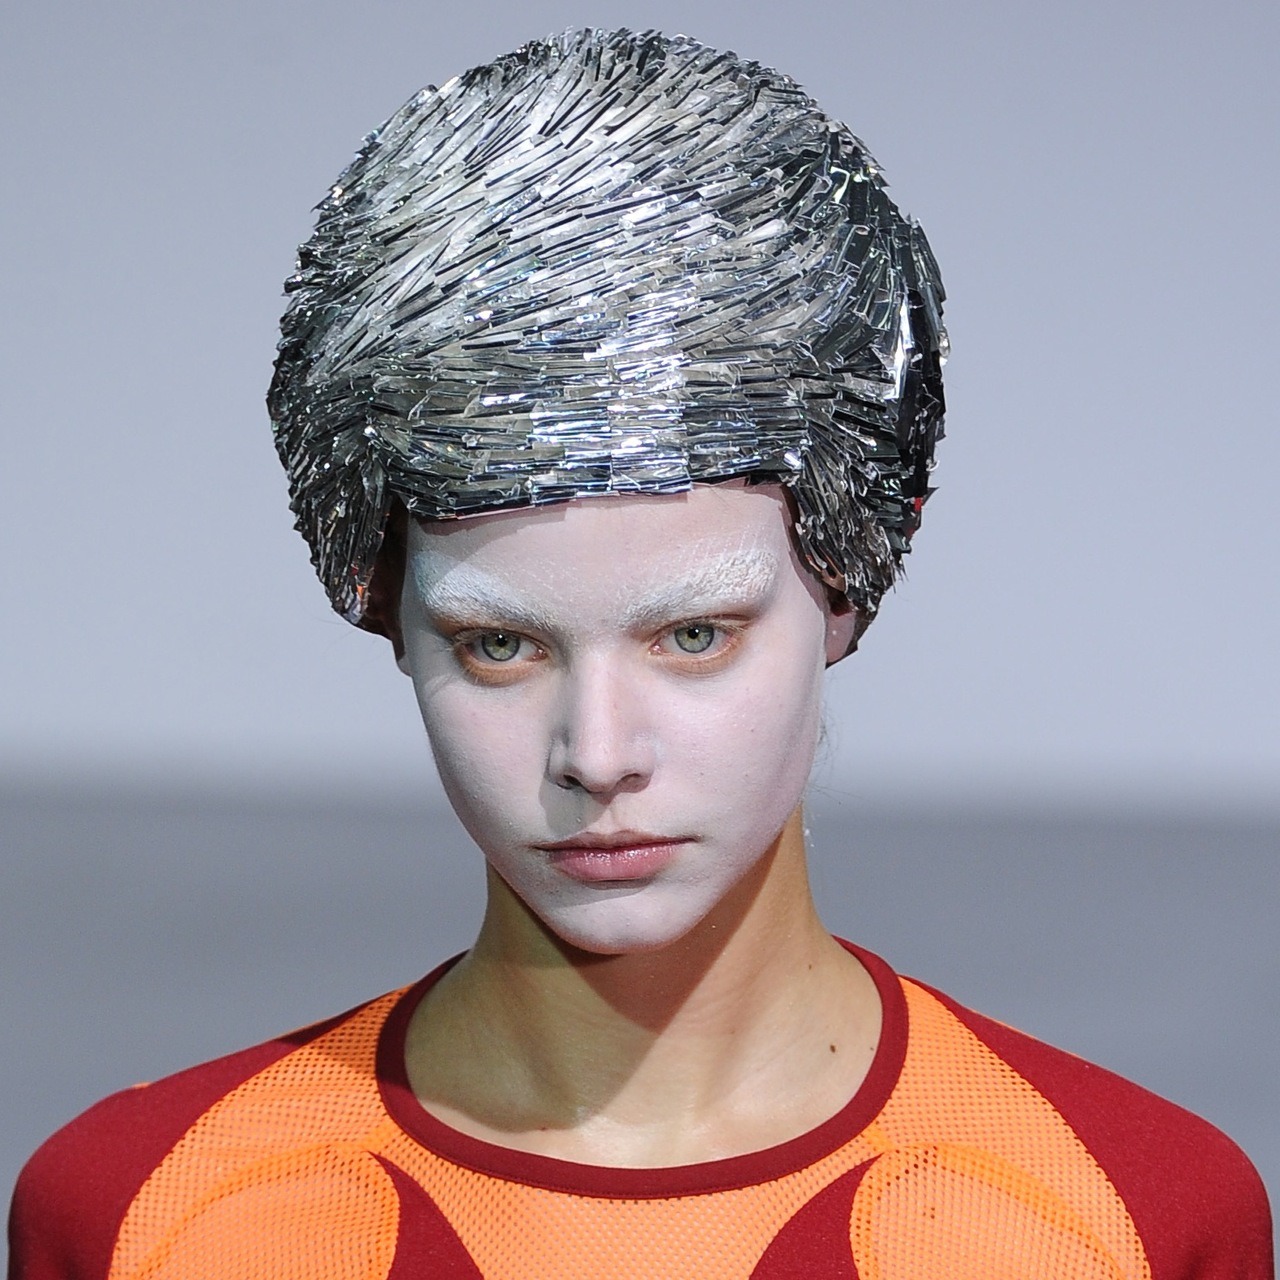 Alien skull hats, sci-fi helmets, futuristic headpieces… what would you ...